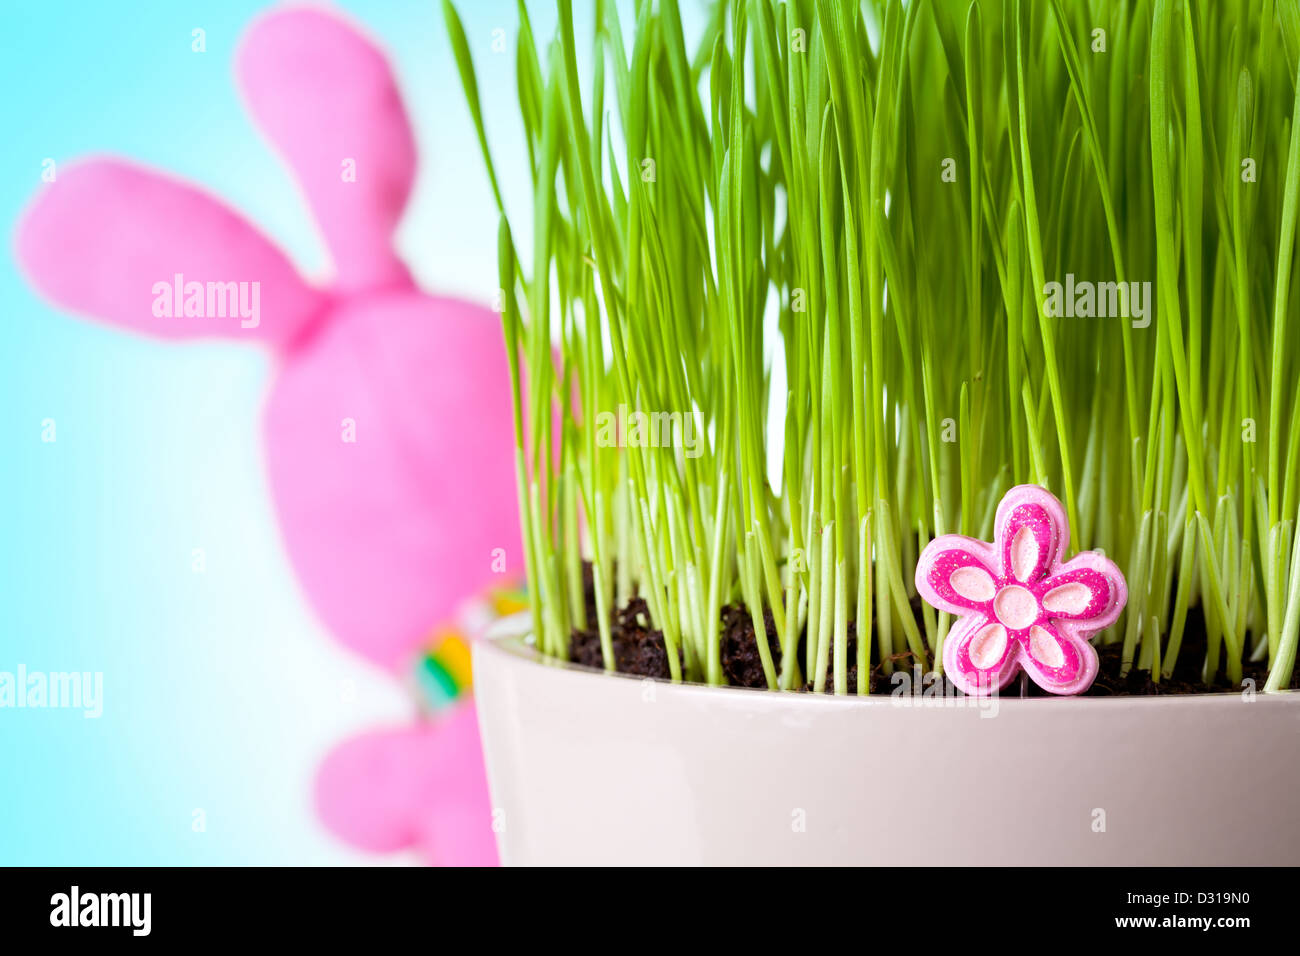 Easter rabbit sitting behind the grass with his back to camera. Focus on pink flower. Stock Photo